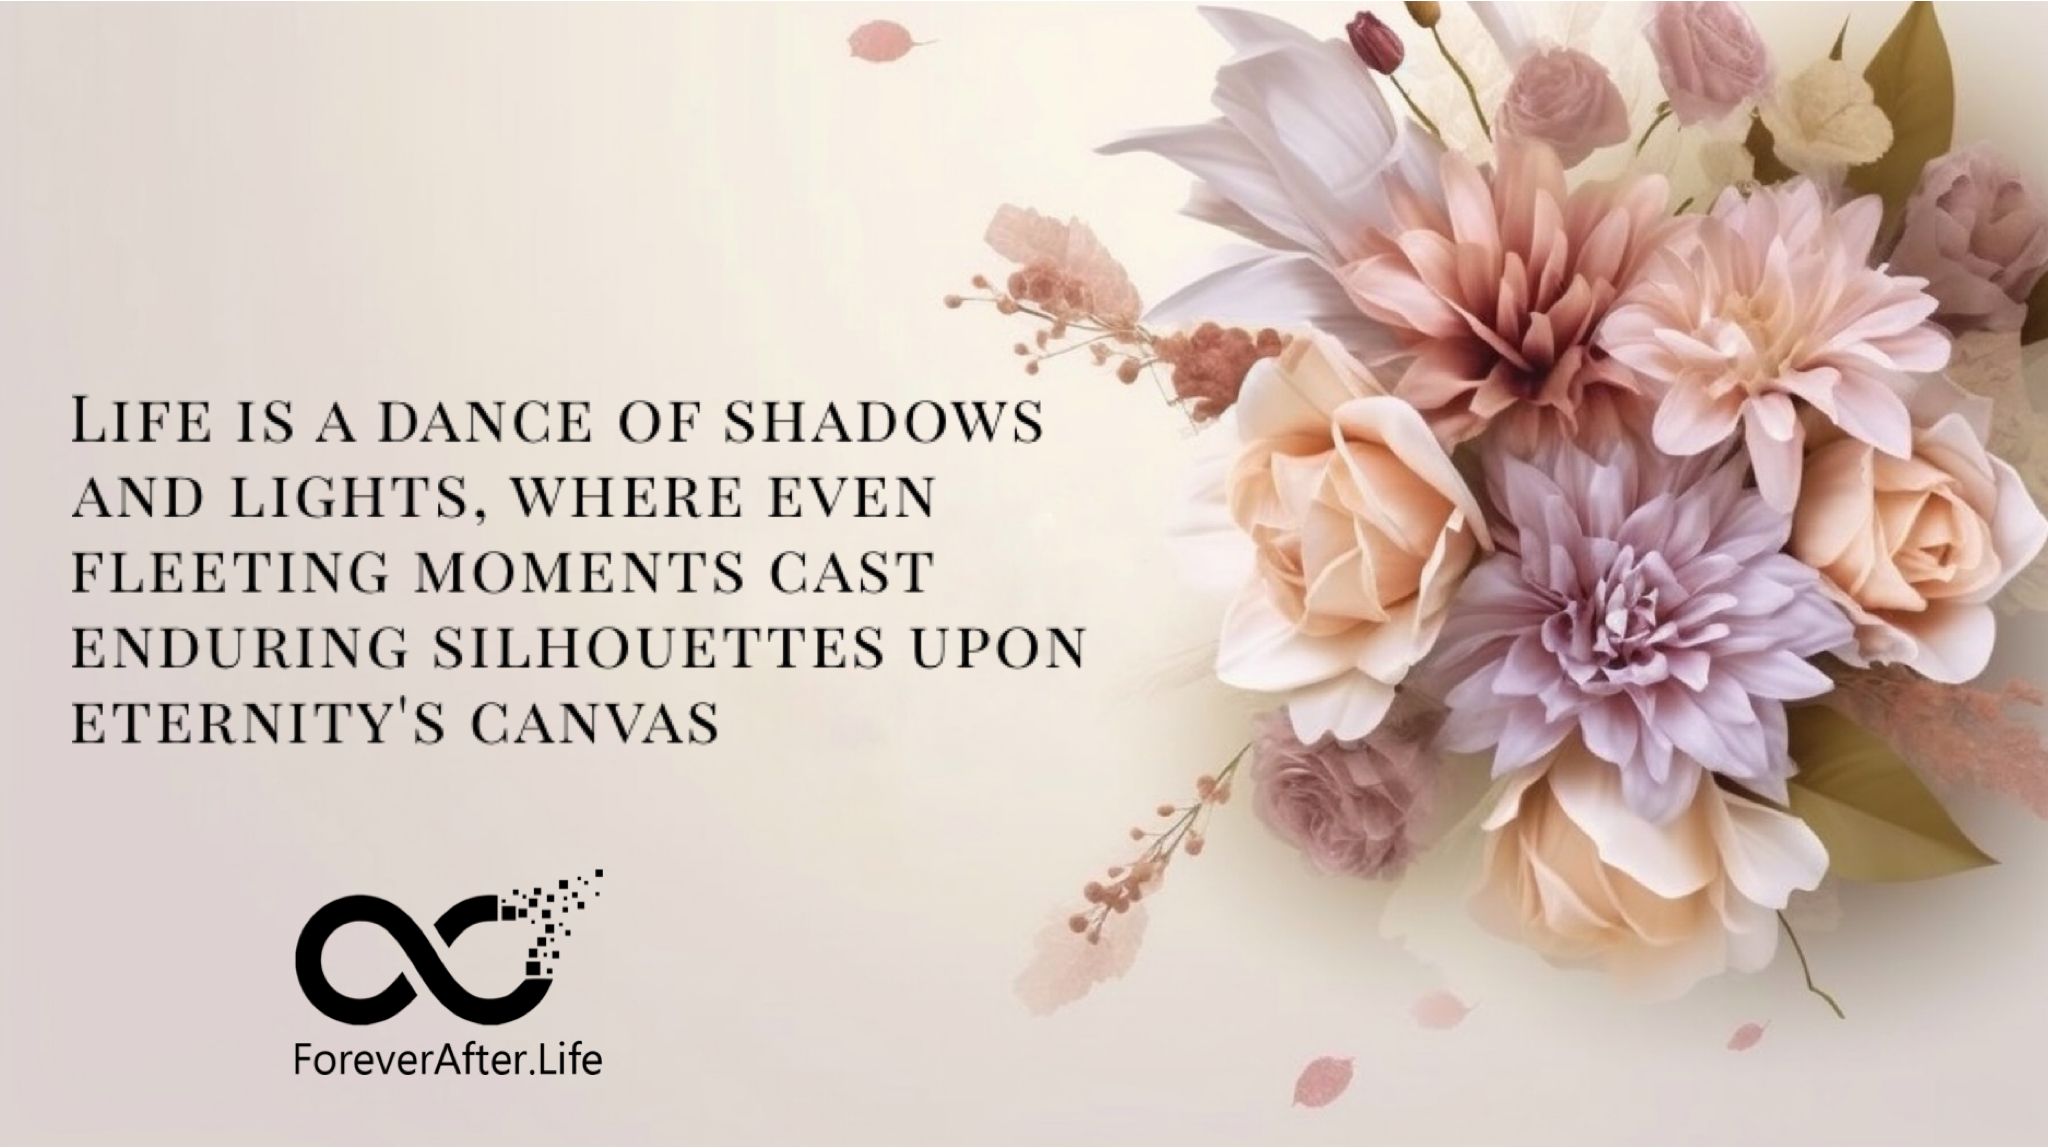 Life is a dance of shadows and lights, where even fleeting moments cast enduring silhouettes upon eternity's canvas